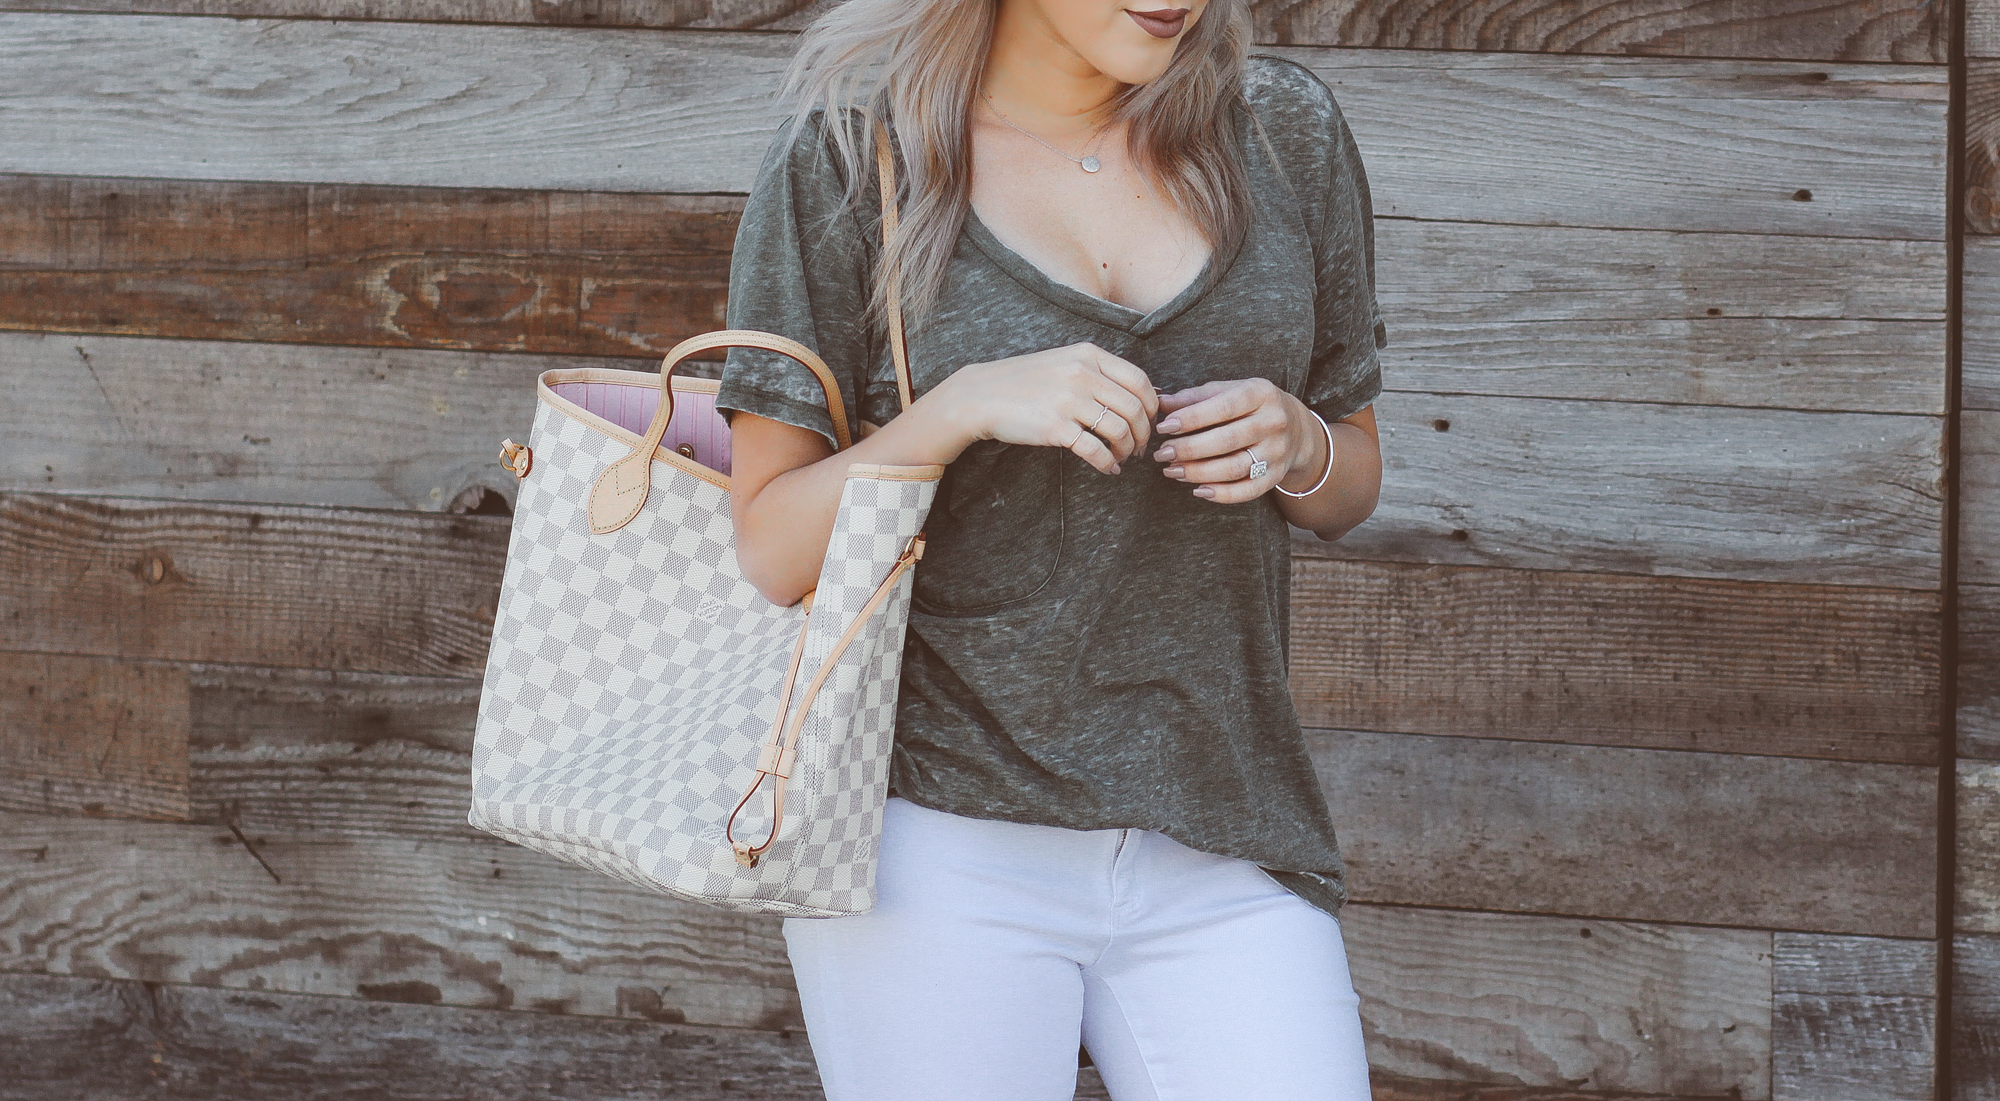 Blondie in the City | Ripped White Jeans & an Olive Green Tee @shopather | White Birkenstocks | Louis Vuitton Bag 